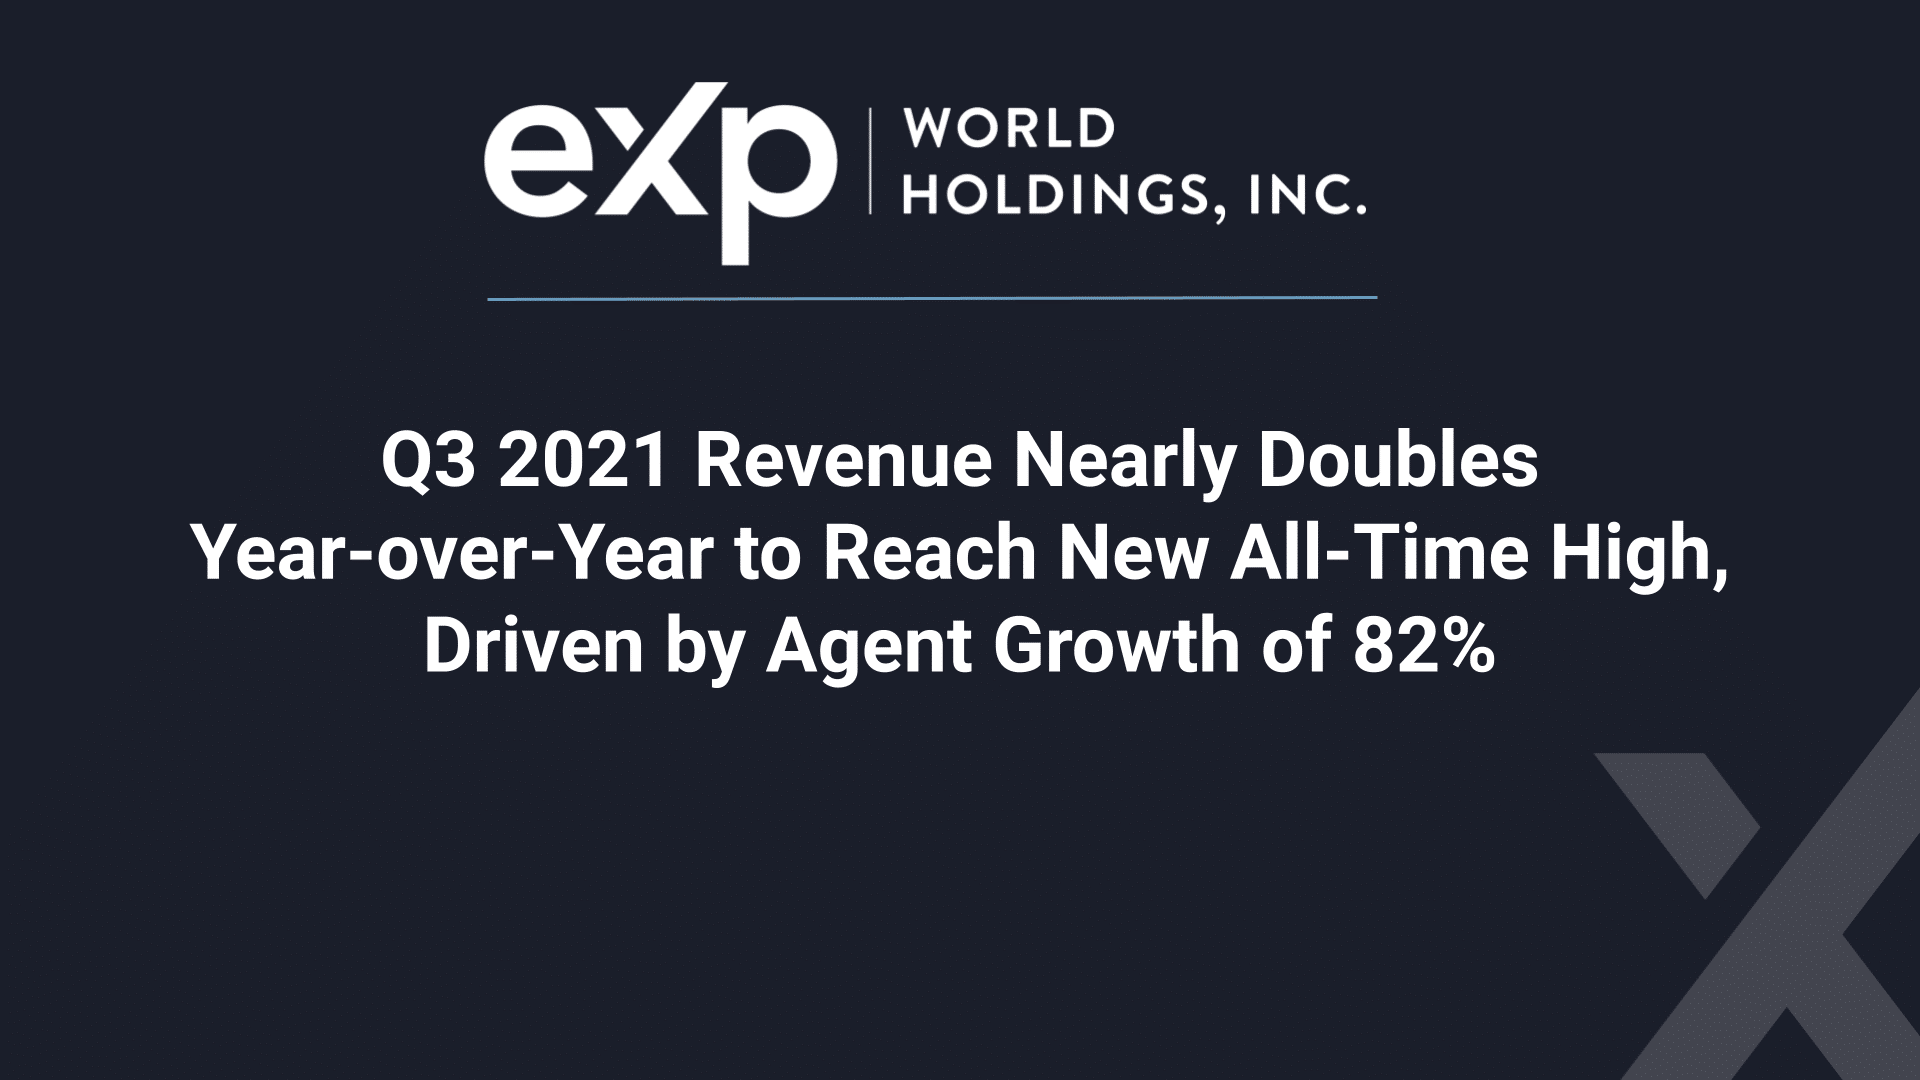 eXp World Holdings Reports Record Third Quarter 2021 Revenue of 1.1